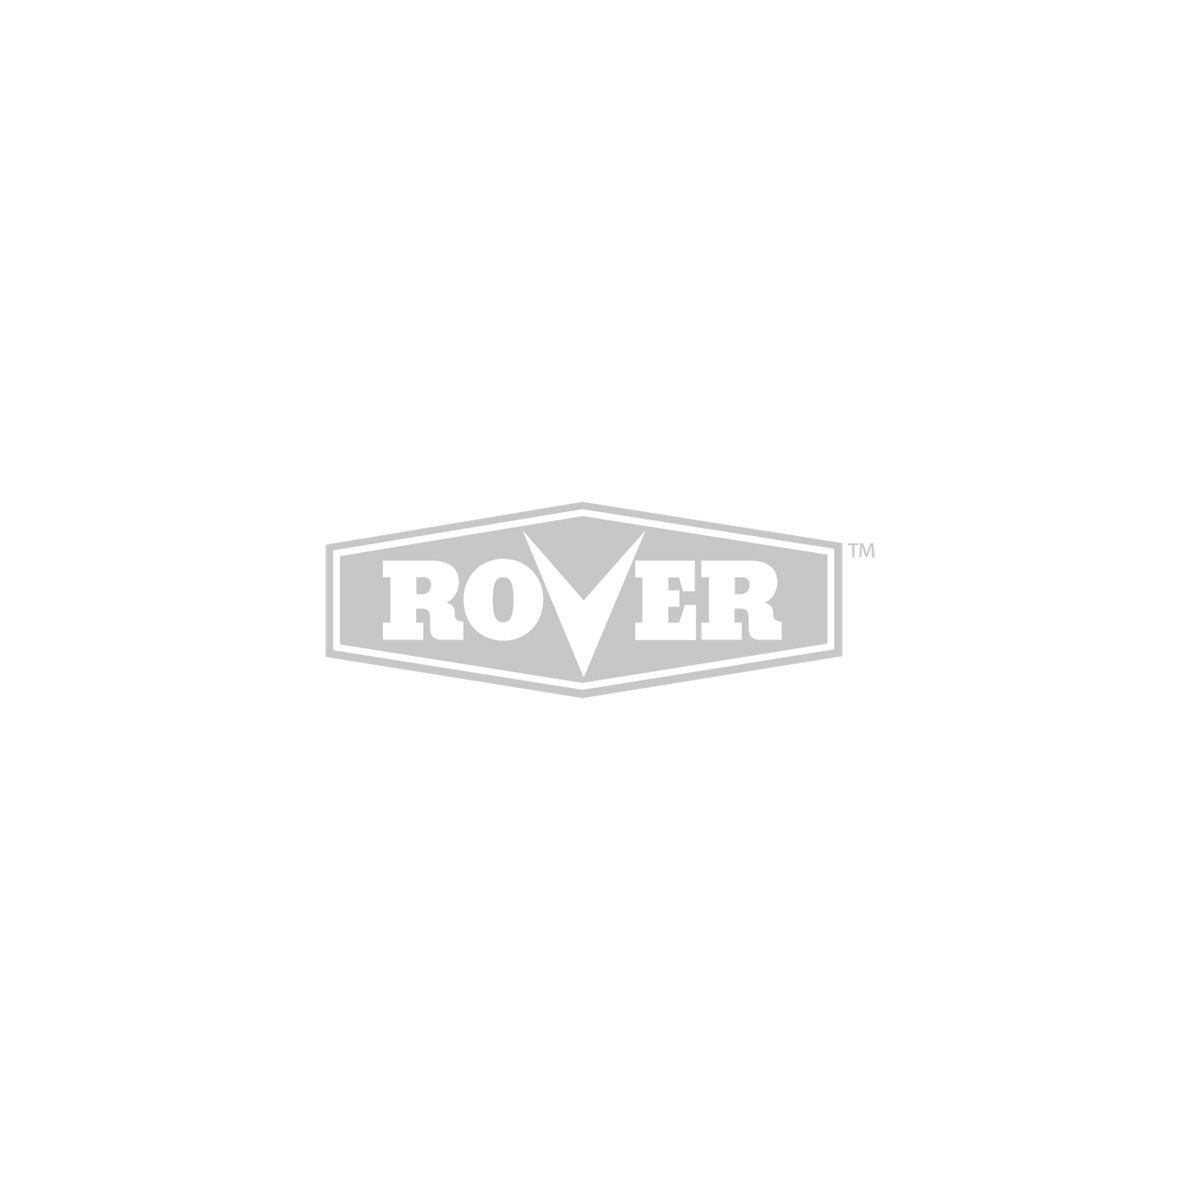 Rover Ride On Cover